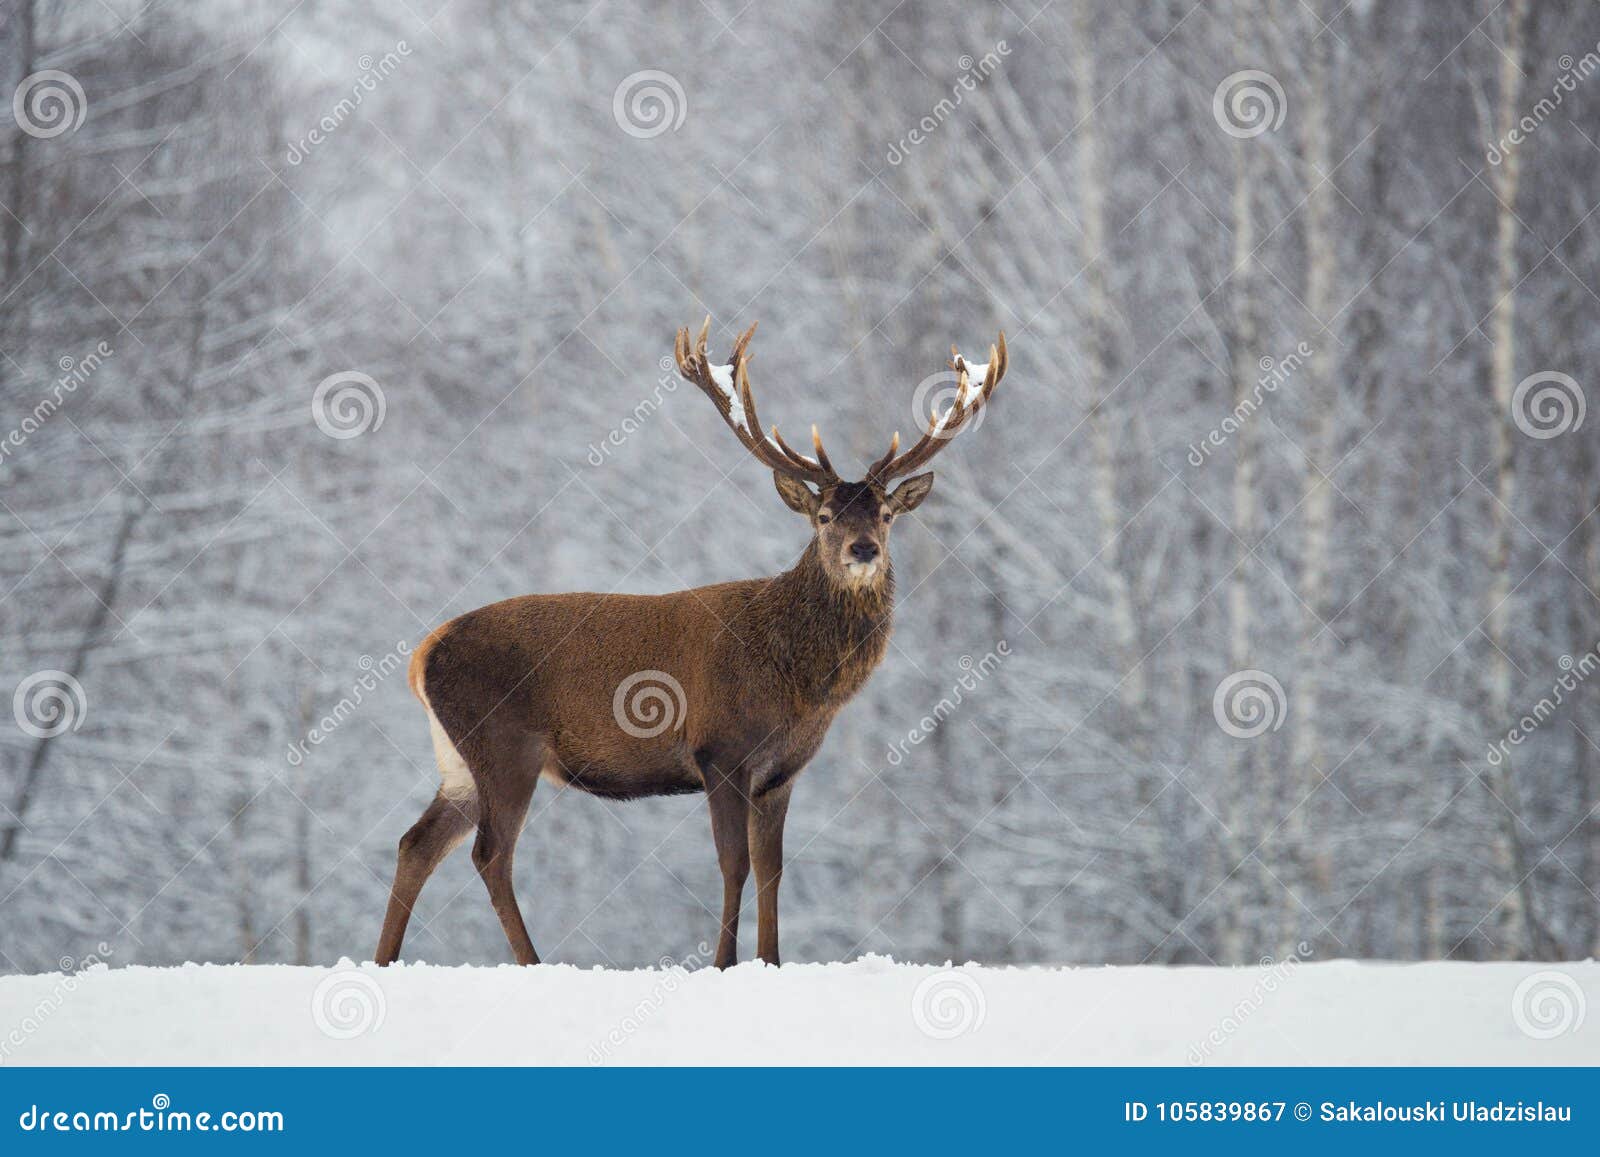 great adult noble red deer with big beautiful horns on snowy field on forest background. cervus elaphus. deer stag close-up